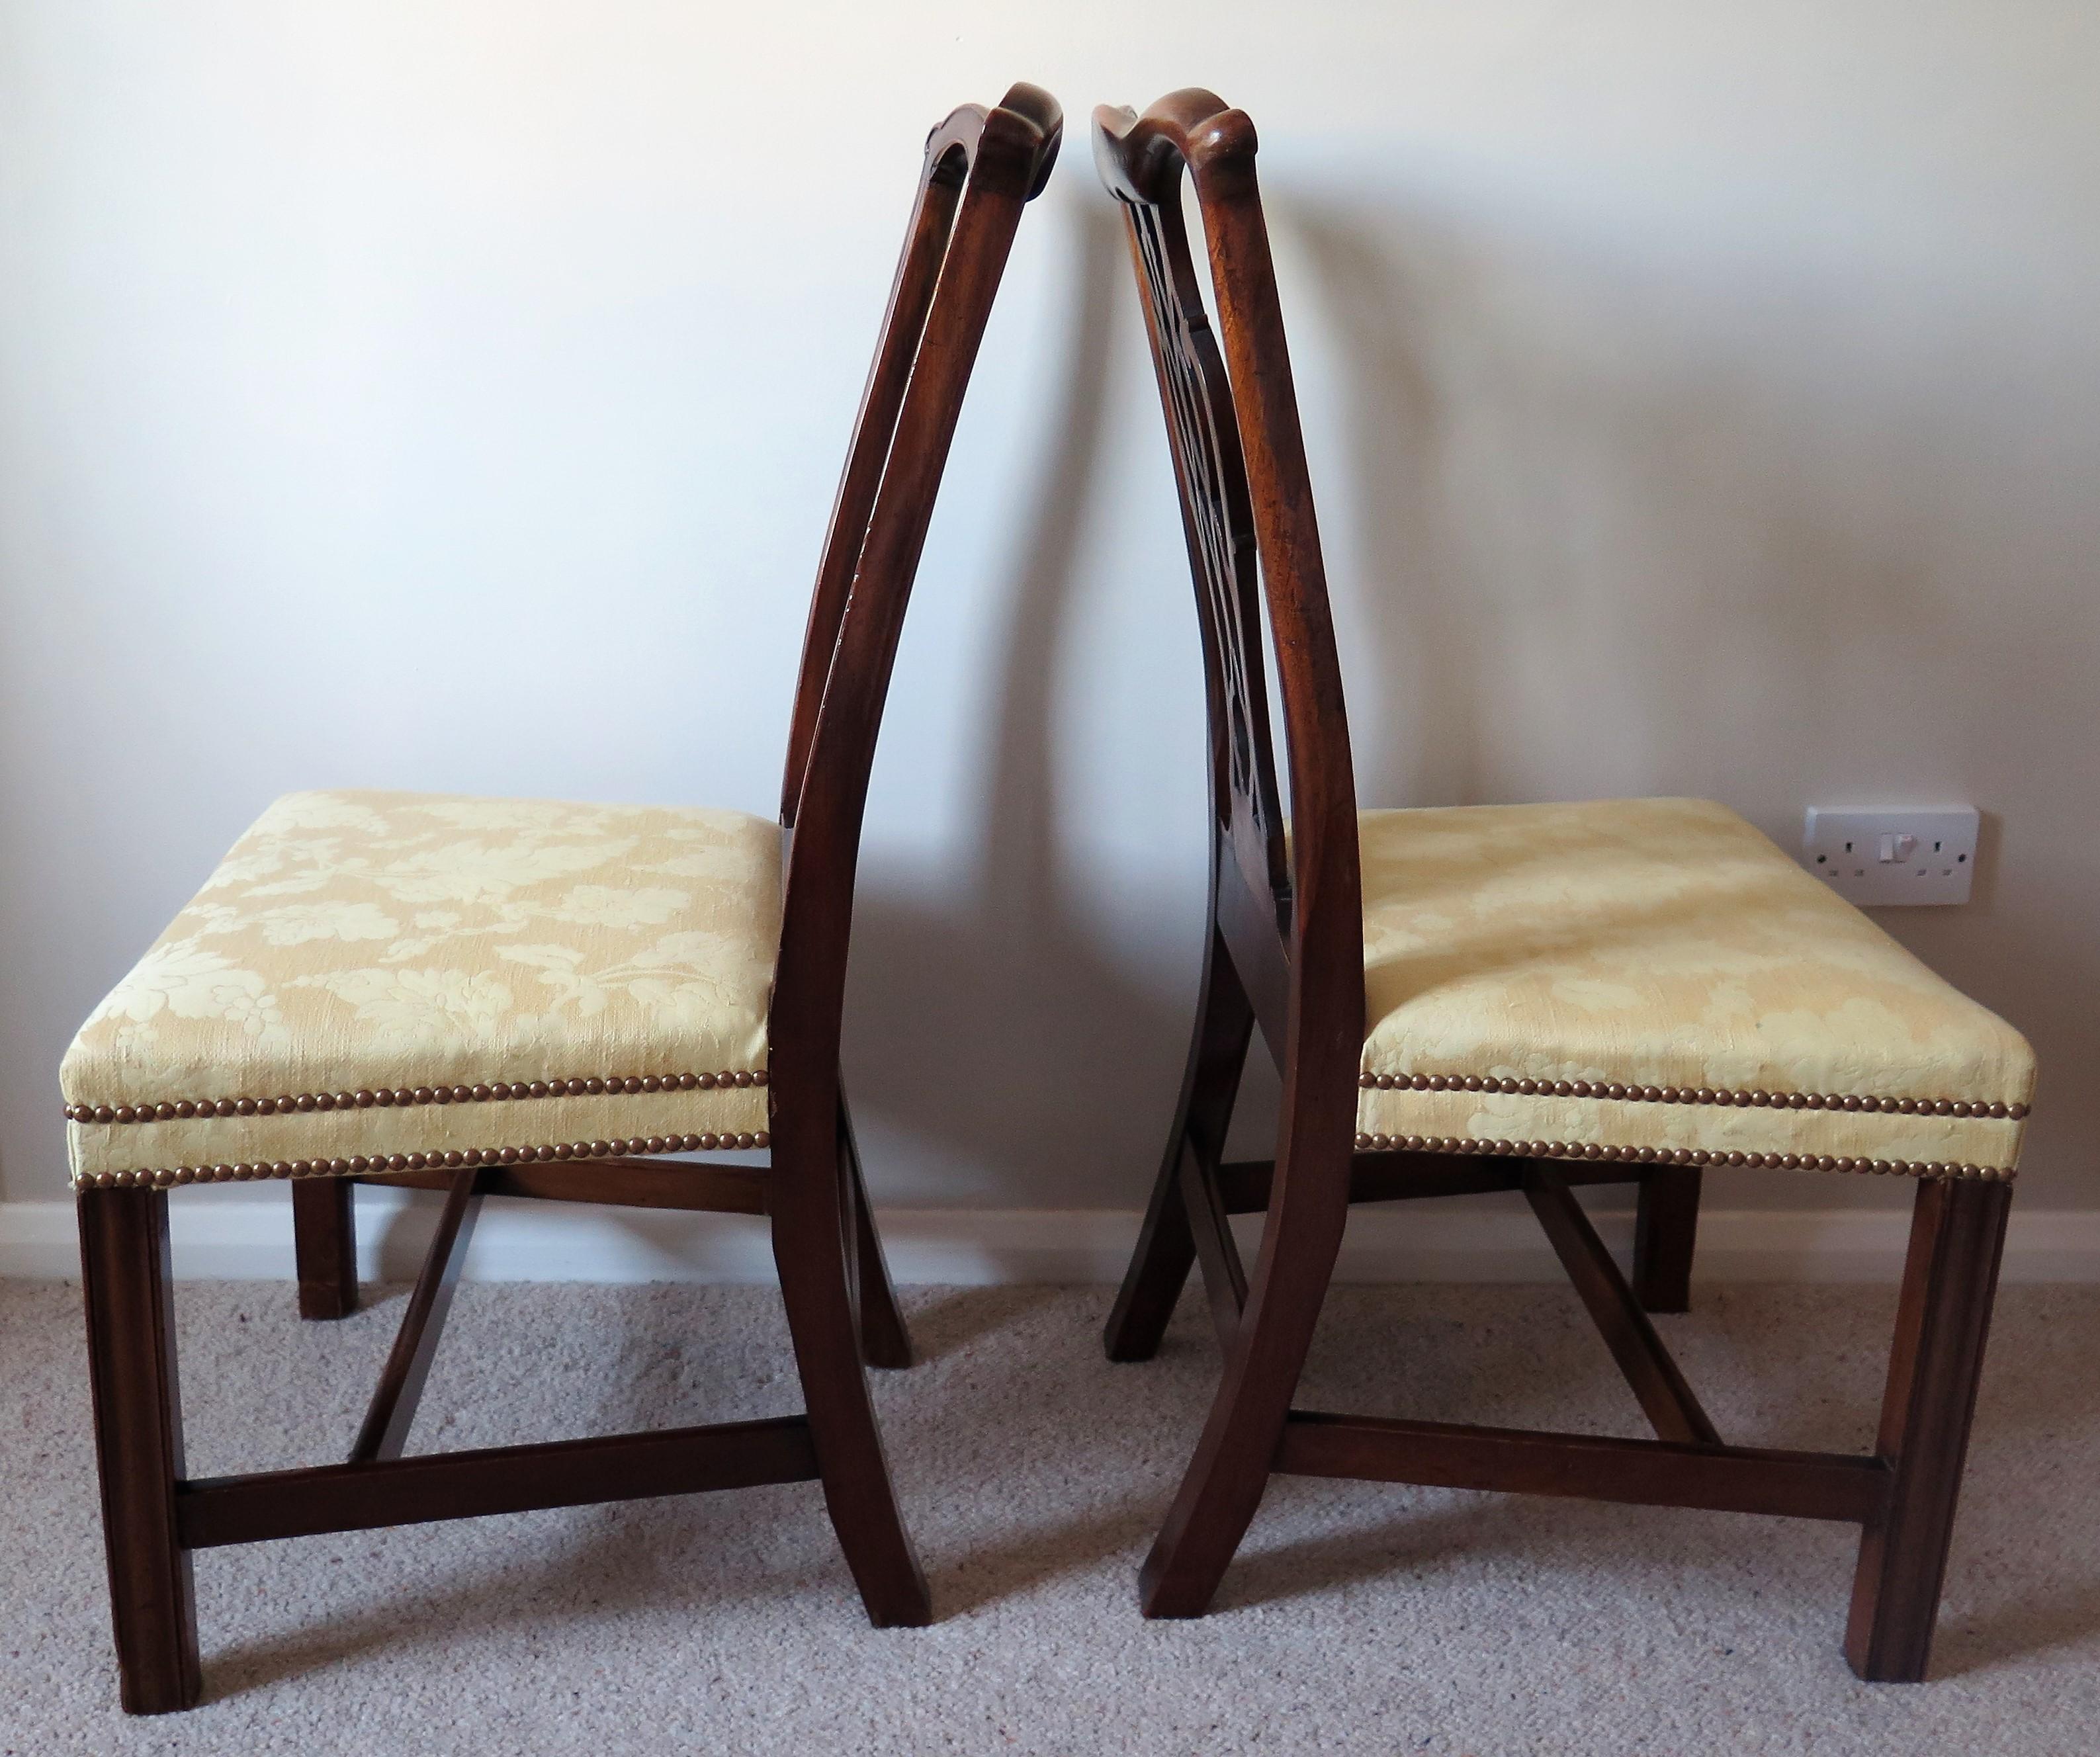 Pair of Elegant George 111 Mahogany Chippendale Chairs Reupholstered, Circa 1770 1